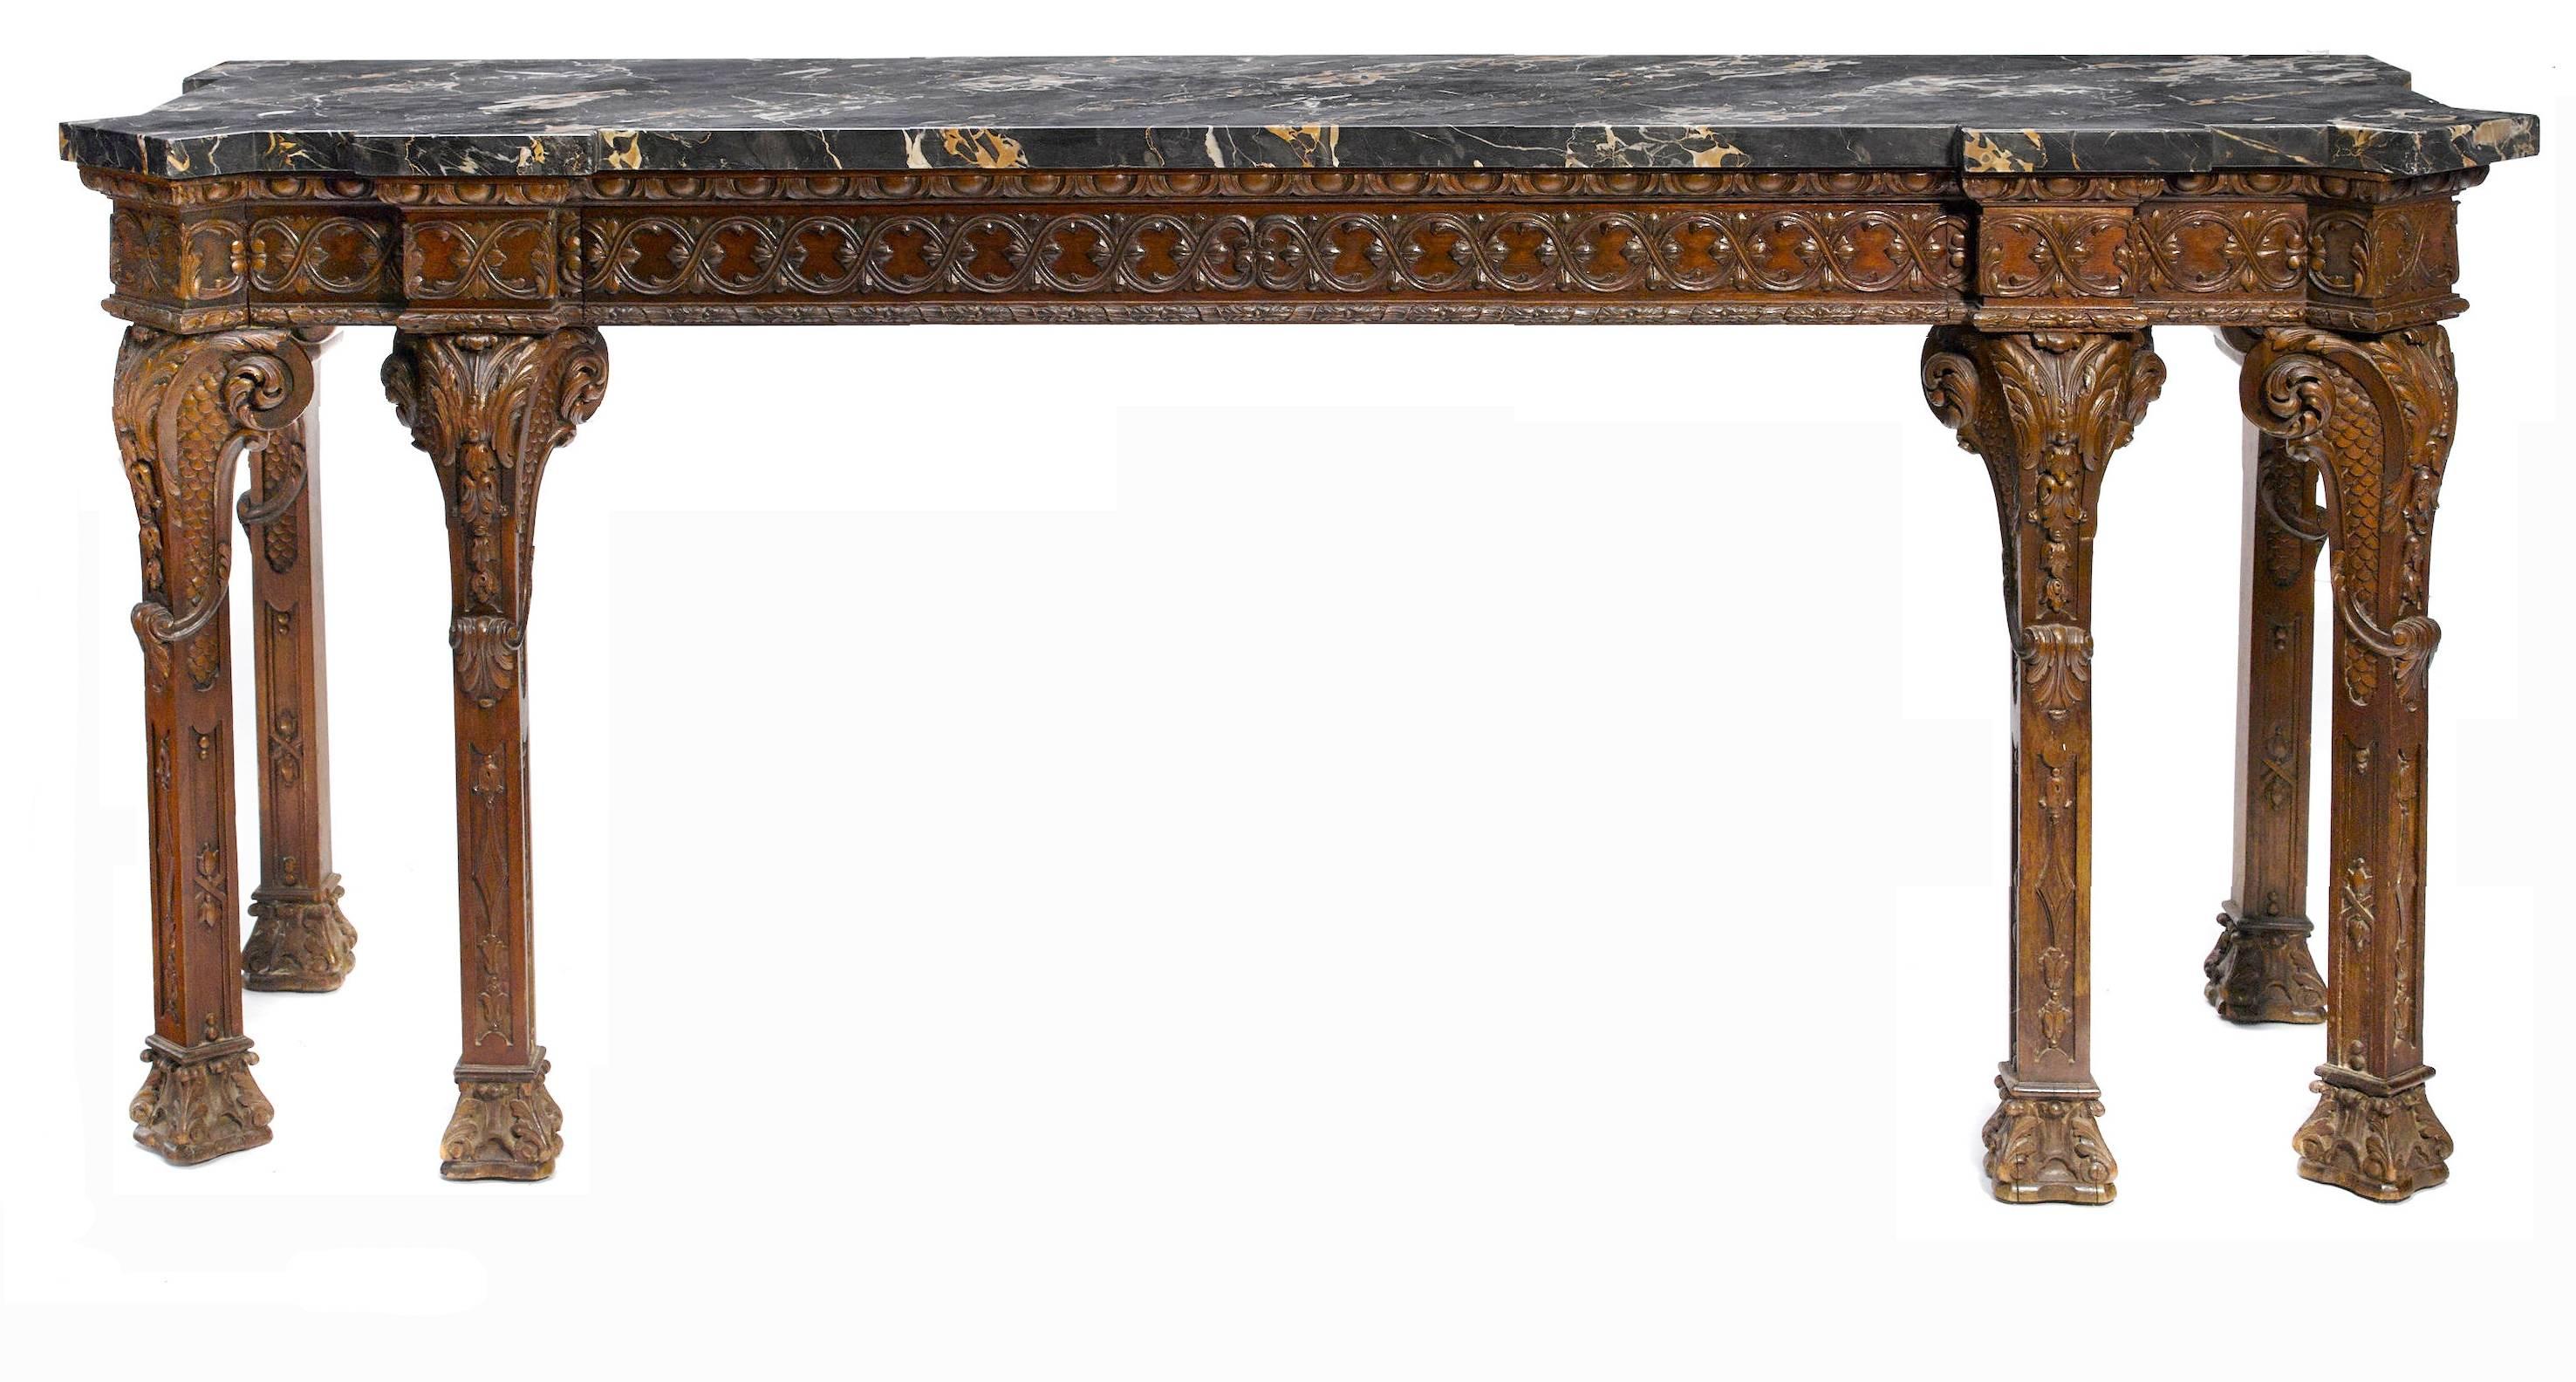 Impressive and large 19th century George III style finely carved mahogany six-legged long console with thick marble top.
Thick marble top over mahogany frieze carved with foliate motif supported by six scrolled legs decorated with scrolling acanthus